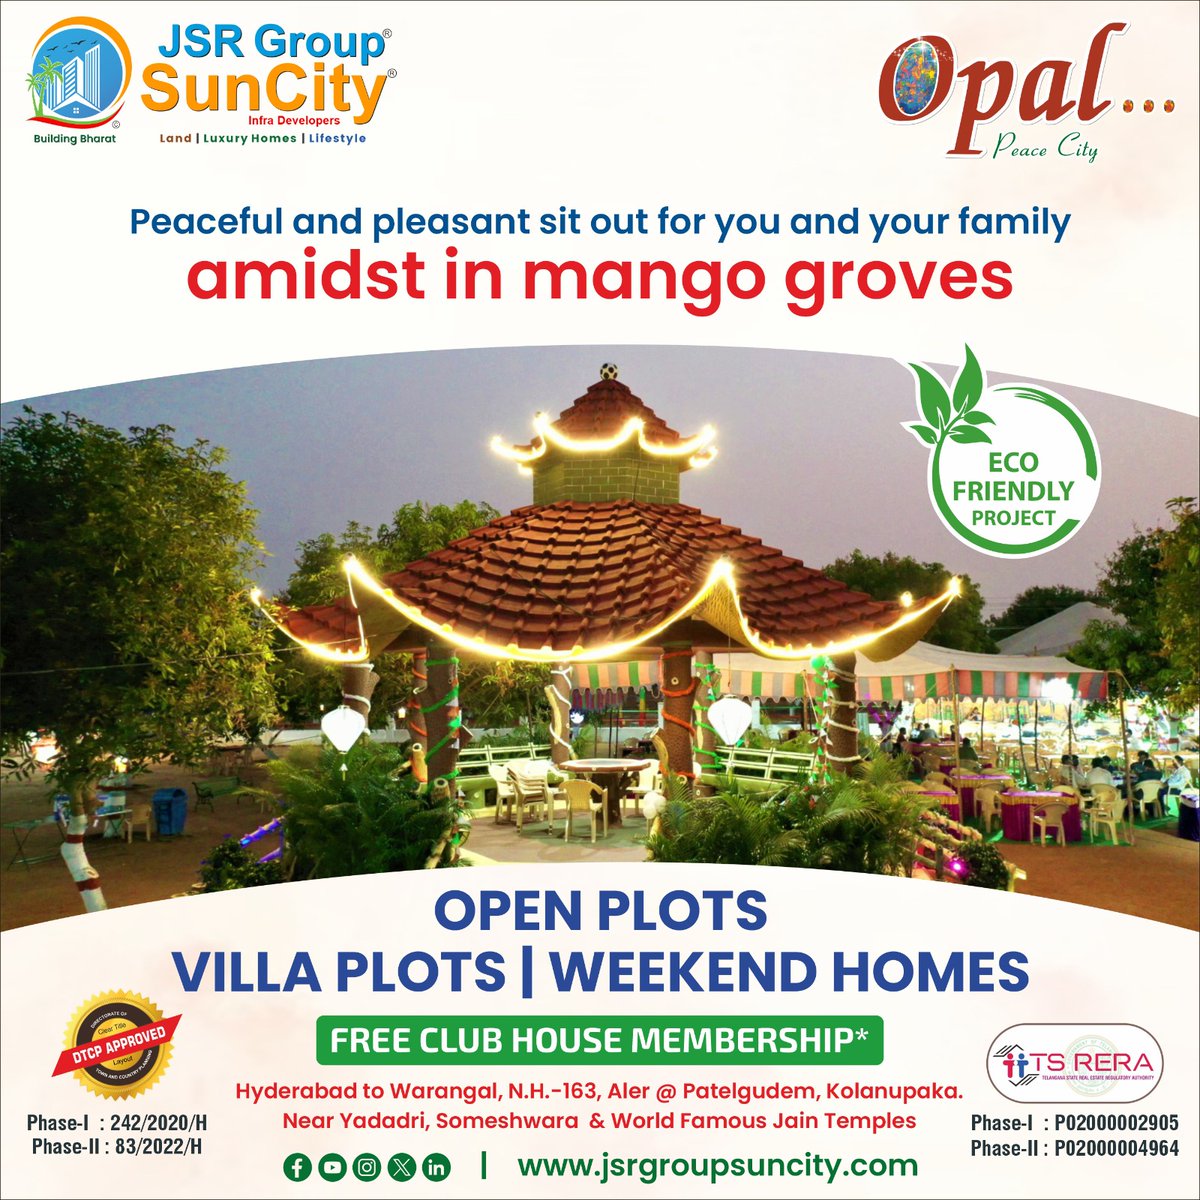 Discover serenity amidst mango groves. Our peaceful sit-out is the ideal escape for your family. Relax, rejuvenate, and reconnect with nature. For more details visit us at jsrgroupsuncity.com/opal.php

#jsrgroupsuncity #smartinvestment #MangoGroveRetreat #FamilyGetaway #ipl2024